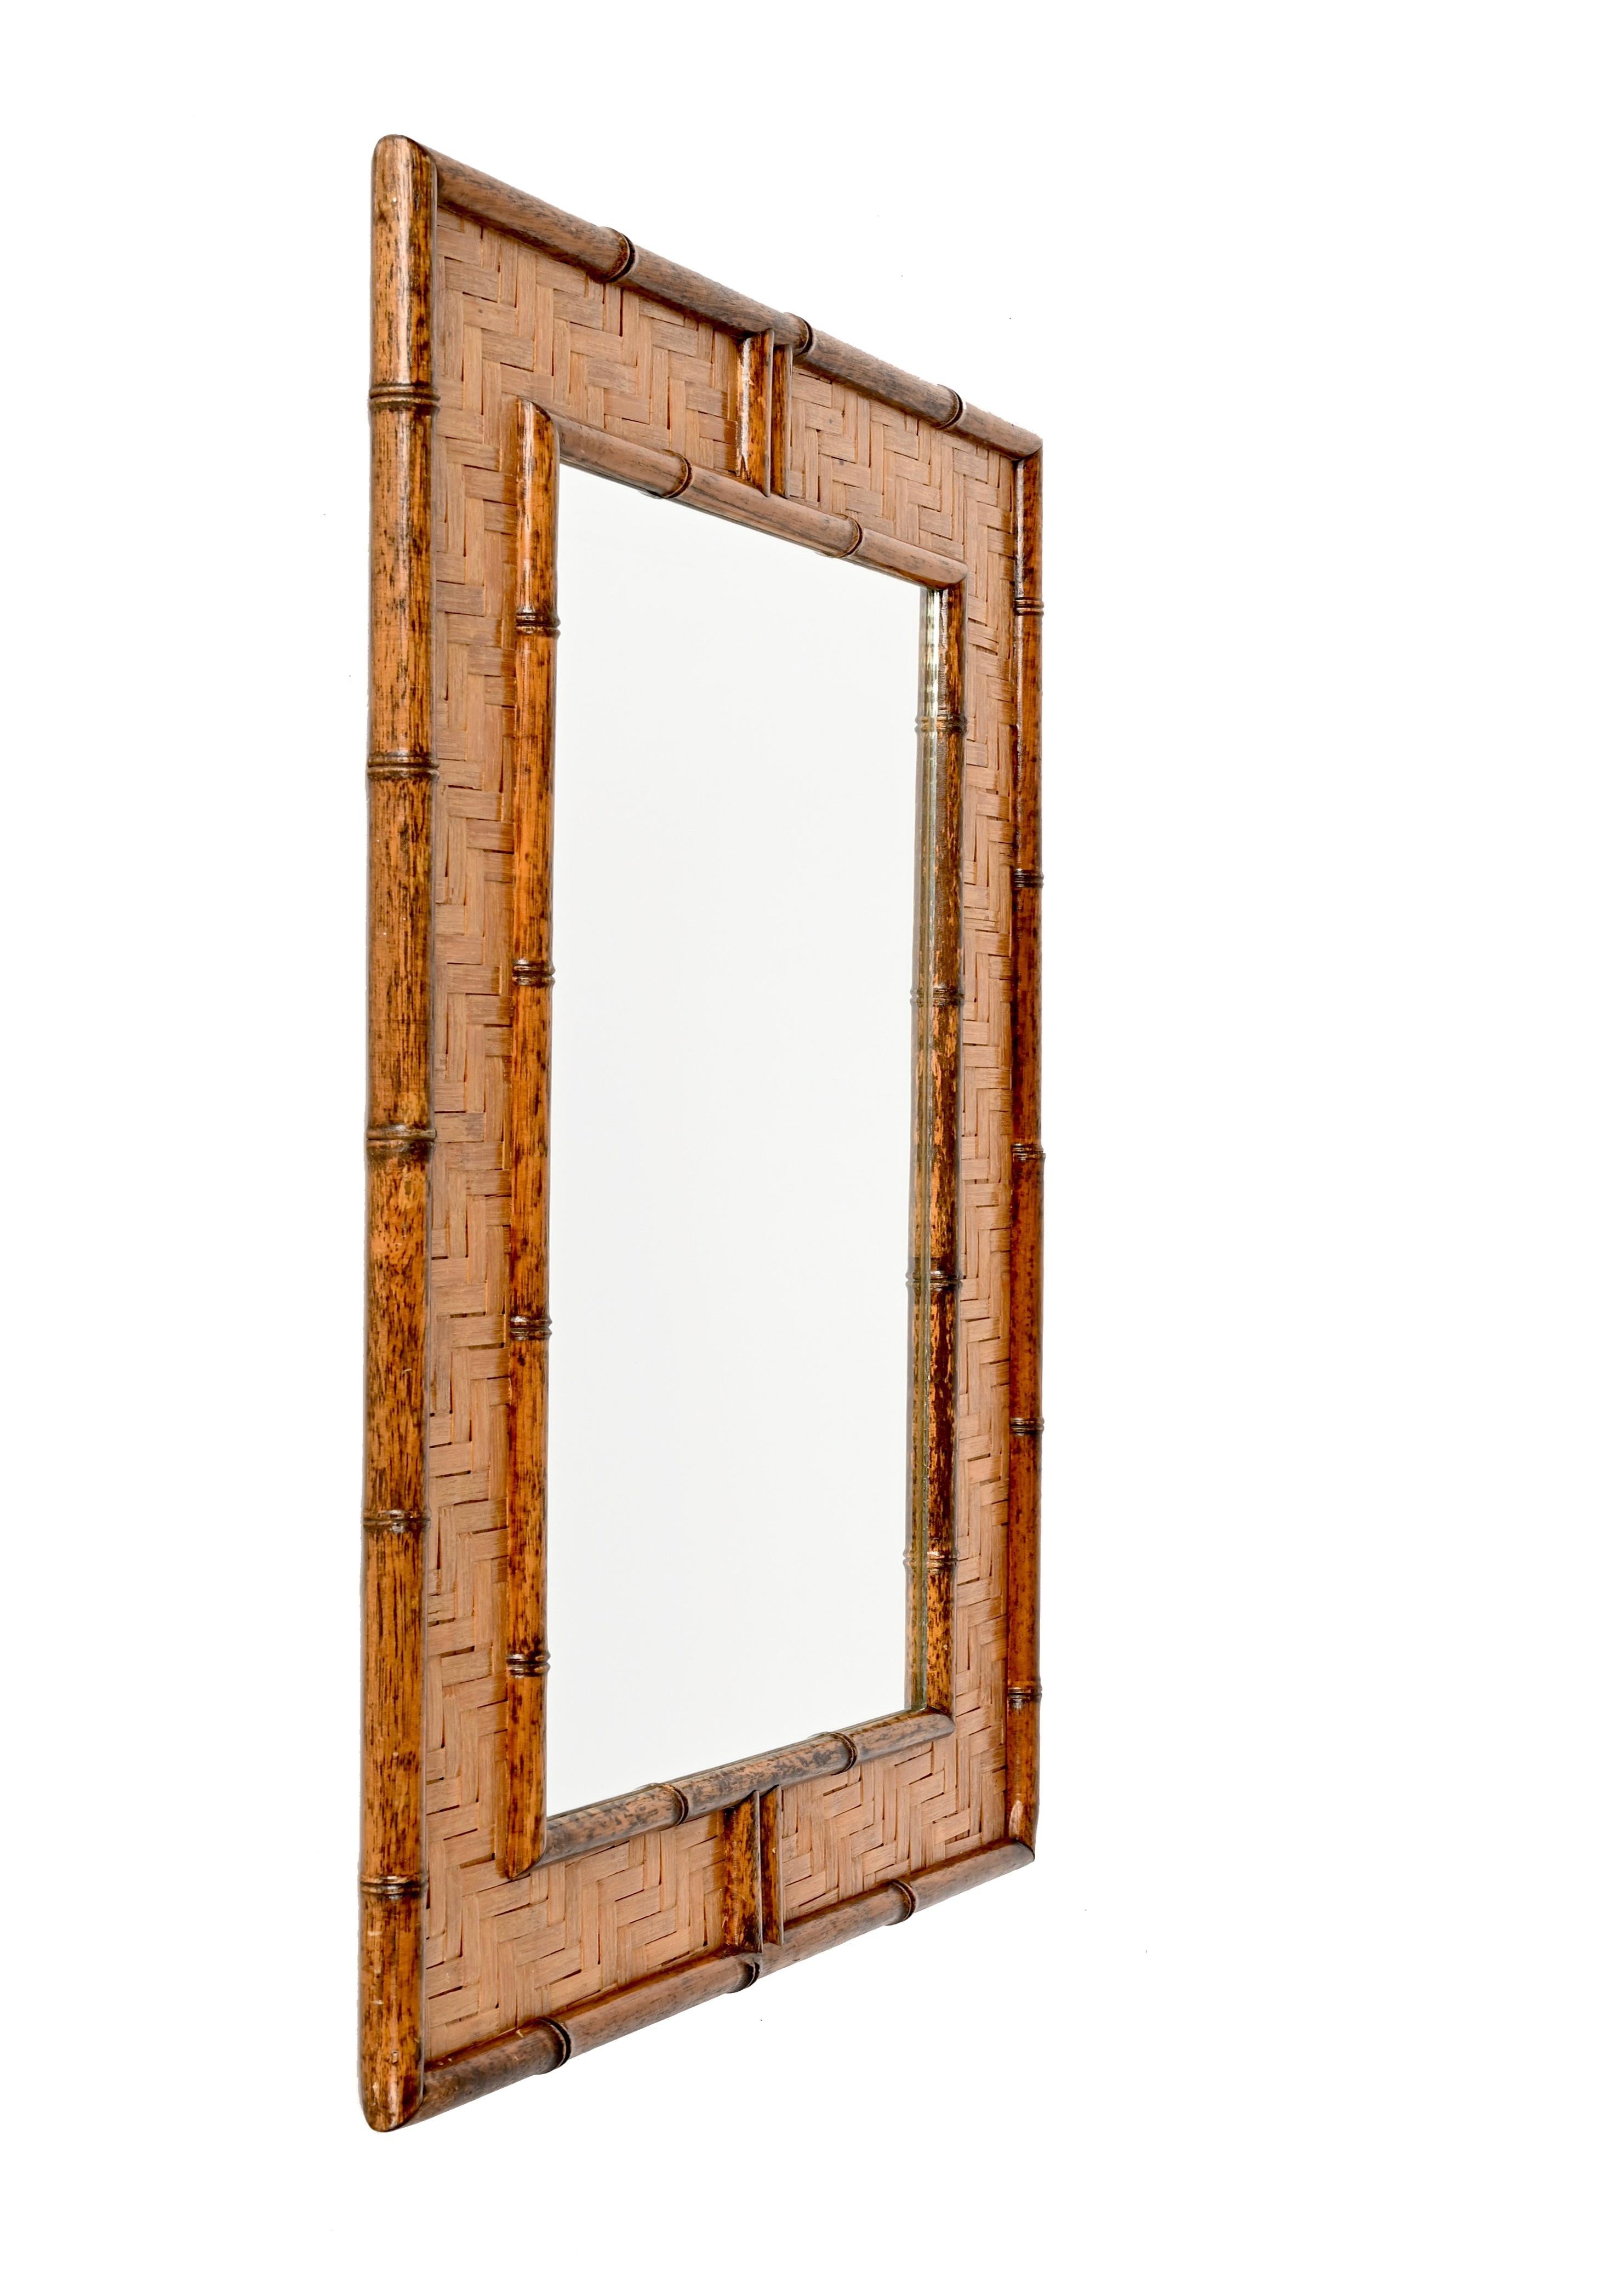 Astonishing midcentury rectangular bamboo cane and woven wicker mirror. This fantastic piece was designed in Italy during the 1960s.

The item is unique thanks to its fantastic frame, made of straight lines give bythe external and internal bamboo